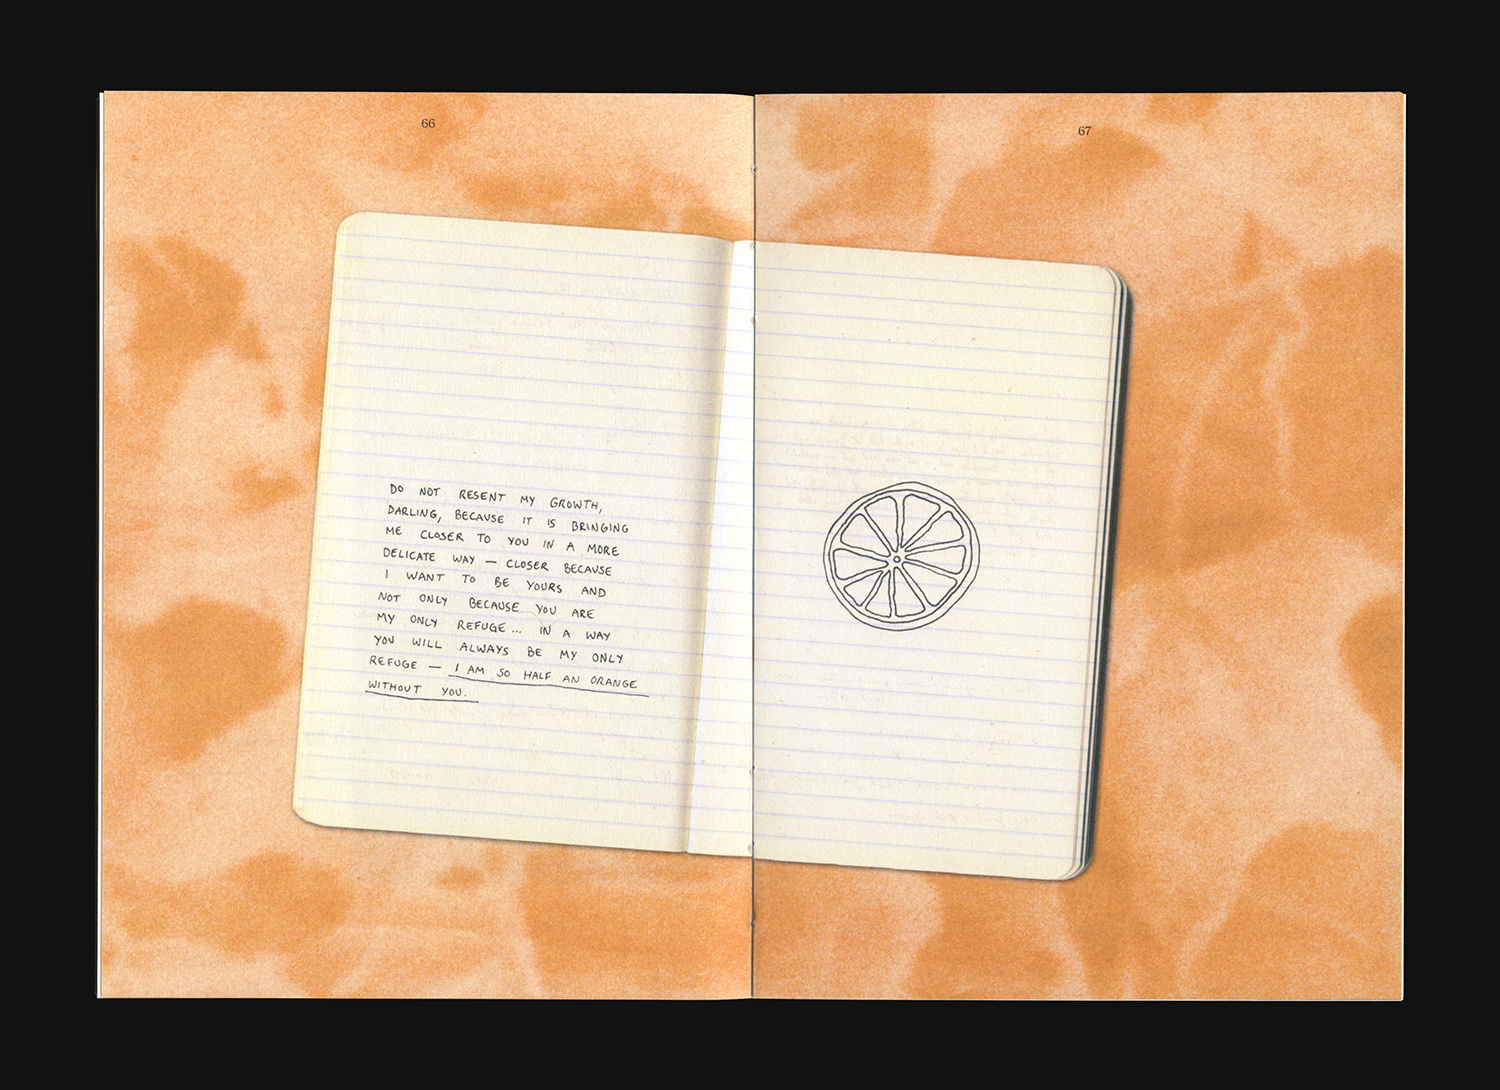 Book spread with text on a notebook.